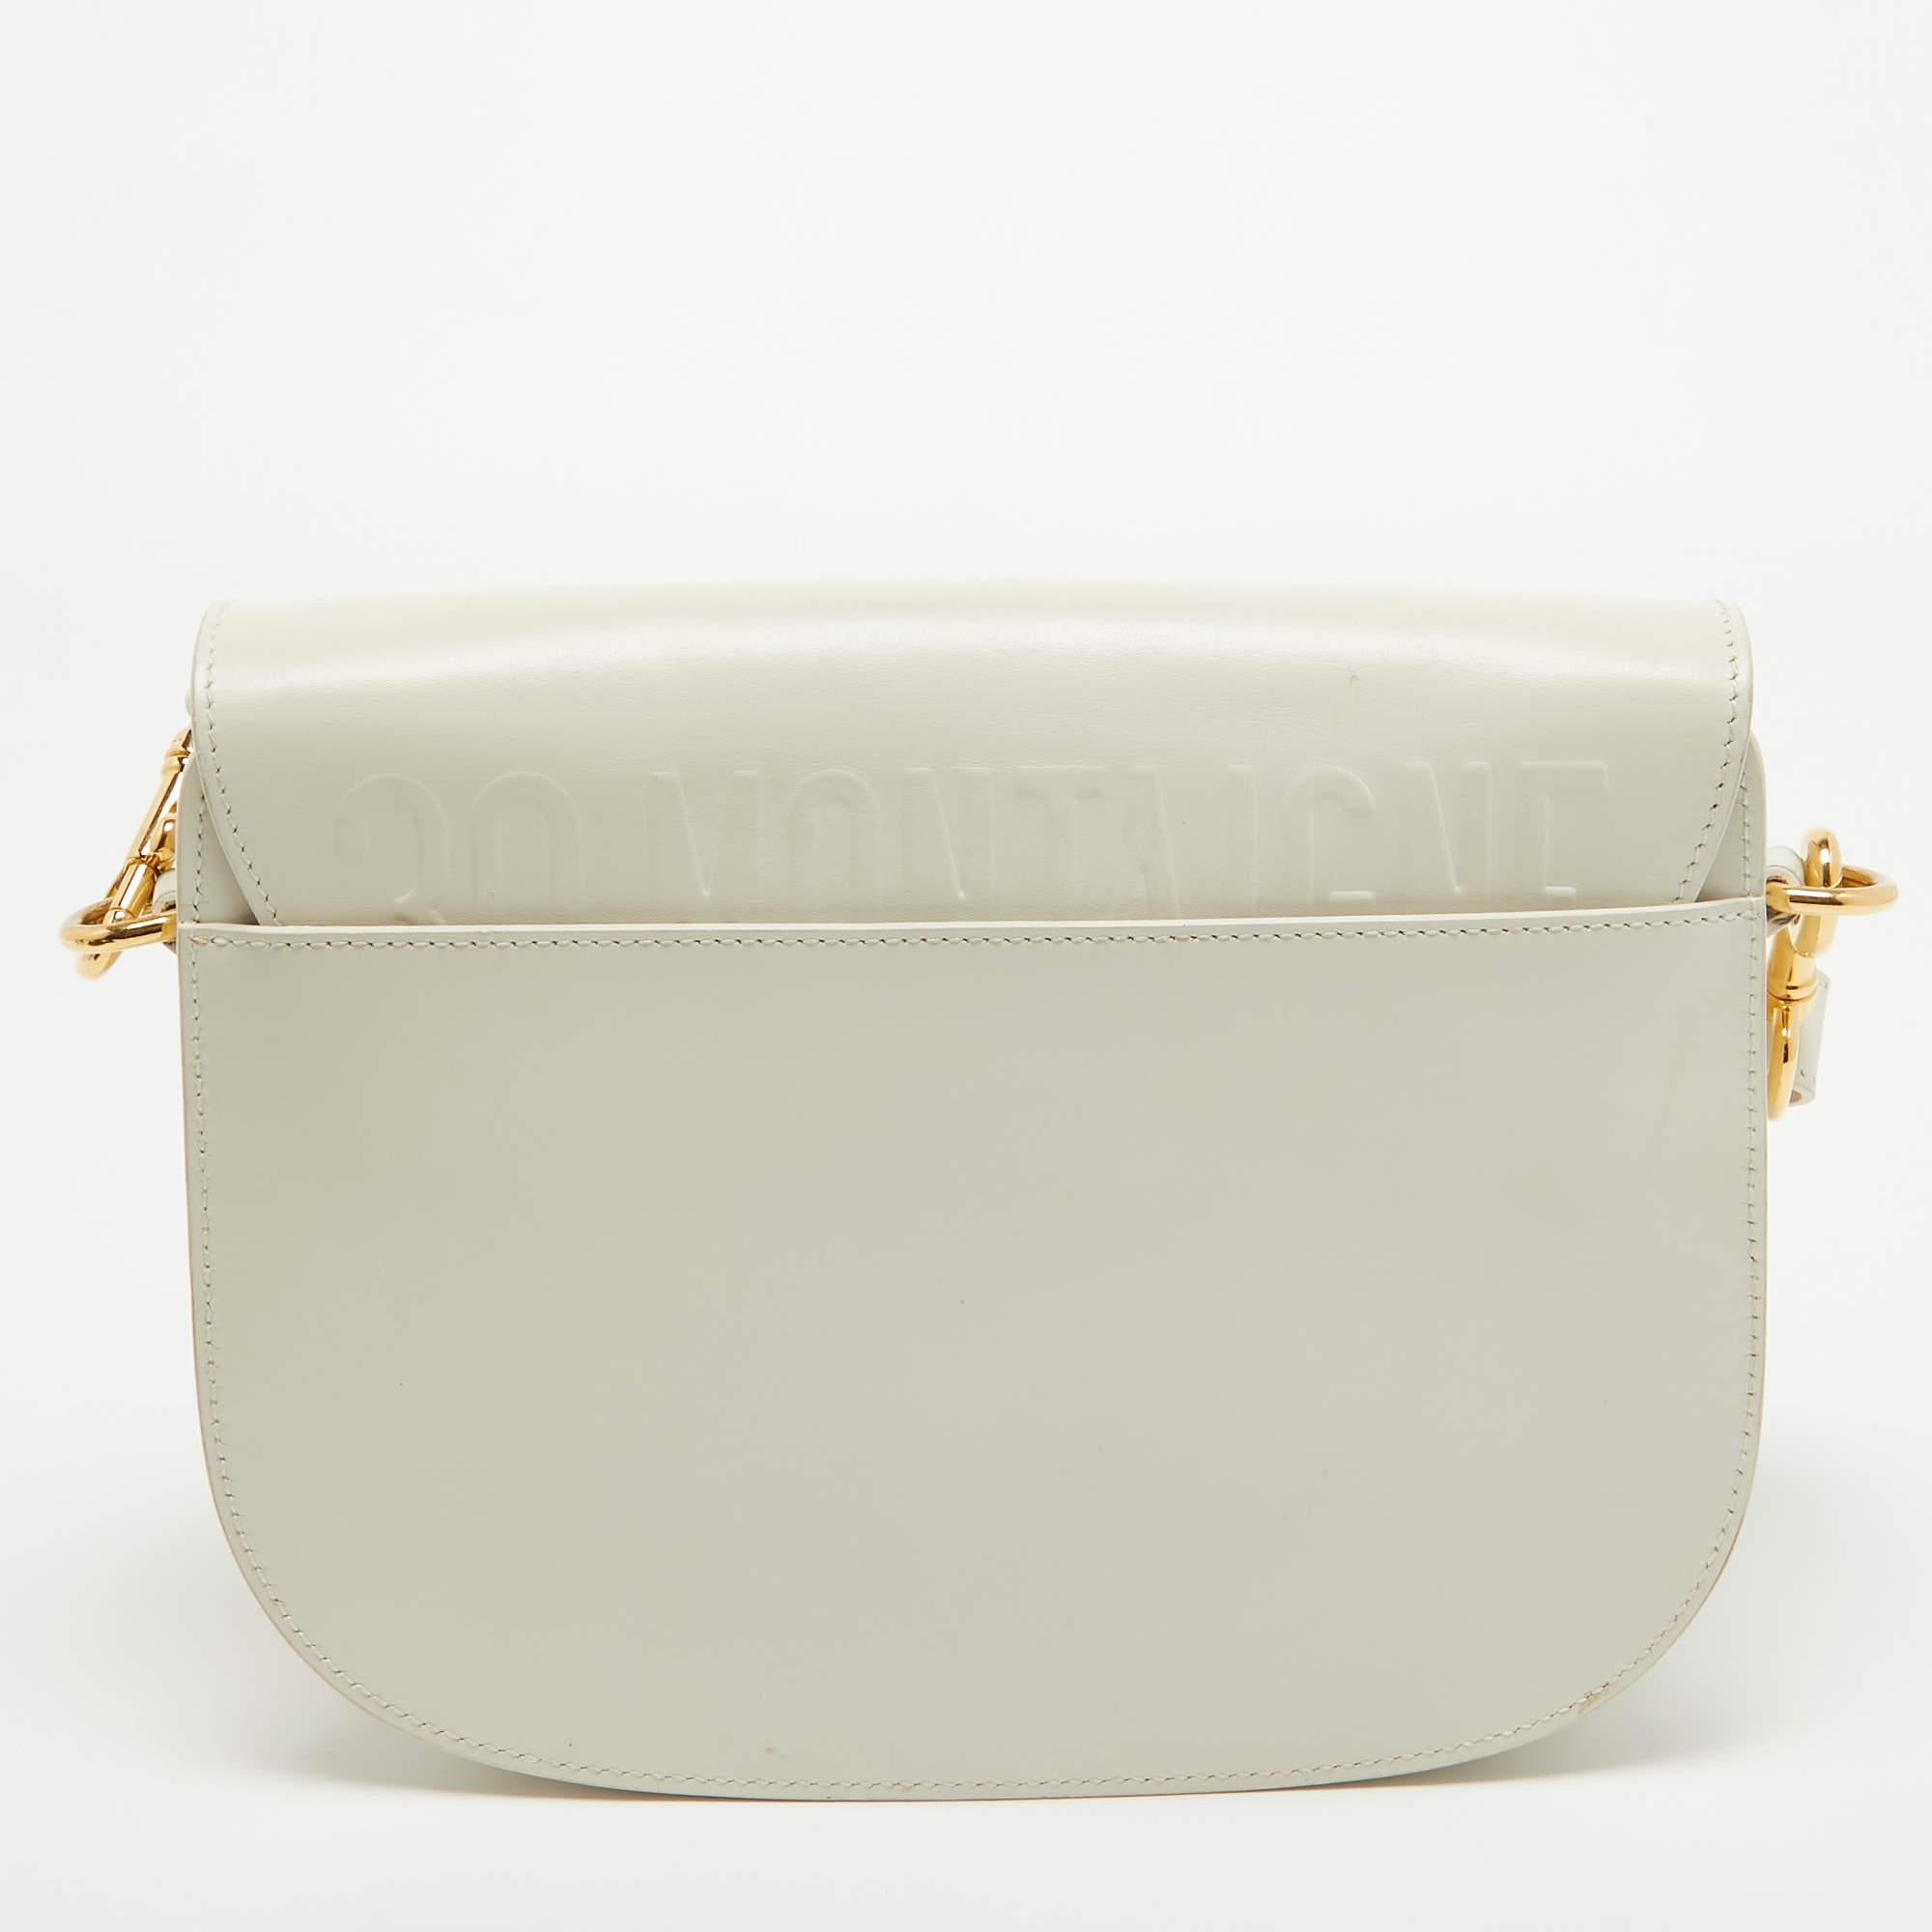 For a look that is complete with style, taste, and a touch of luxe, this shoulder bag is the perfect addition. Flaunt this beauty on your shoulder at any event and revel in the taste of luxury it leaves you with.

Includes: Detachable strap,